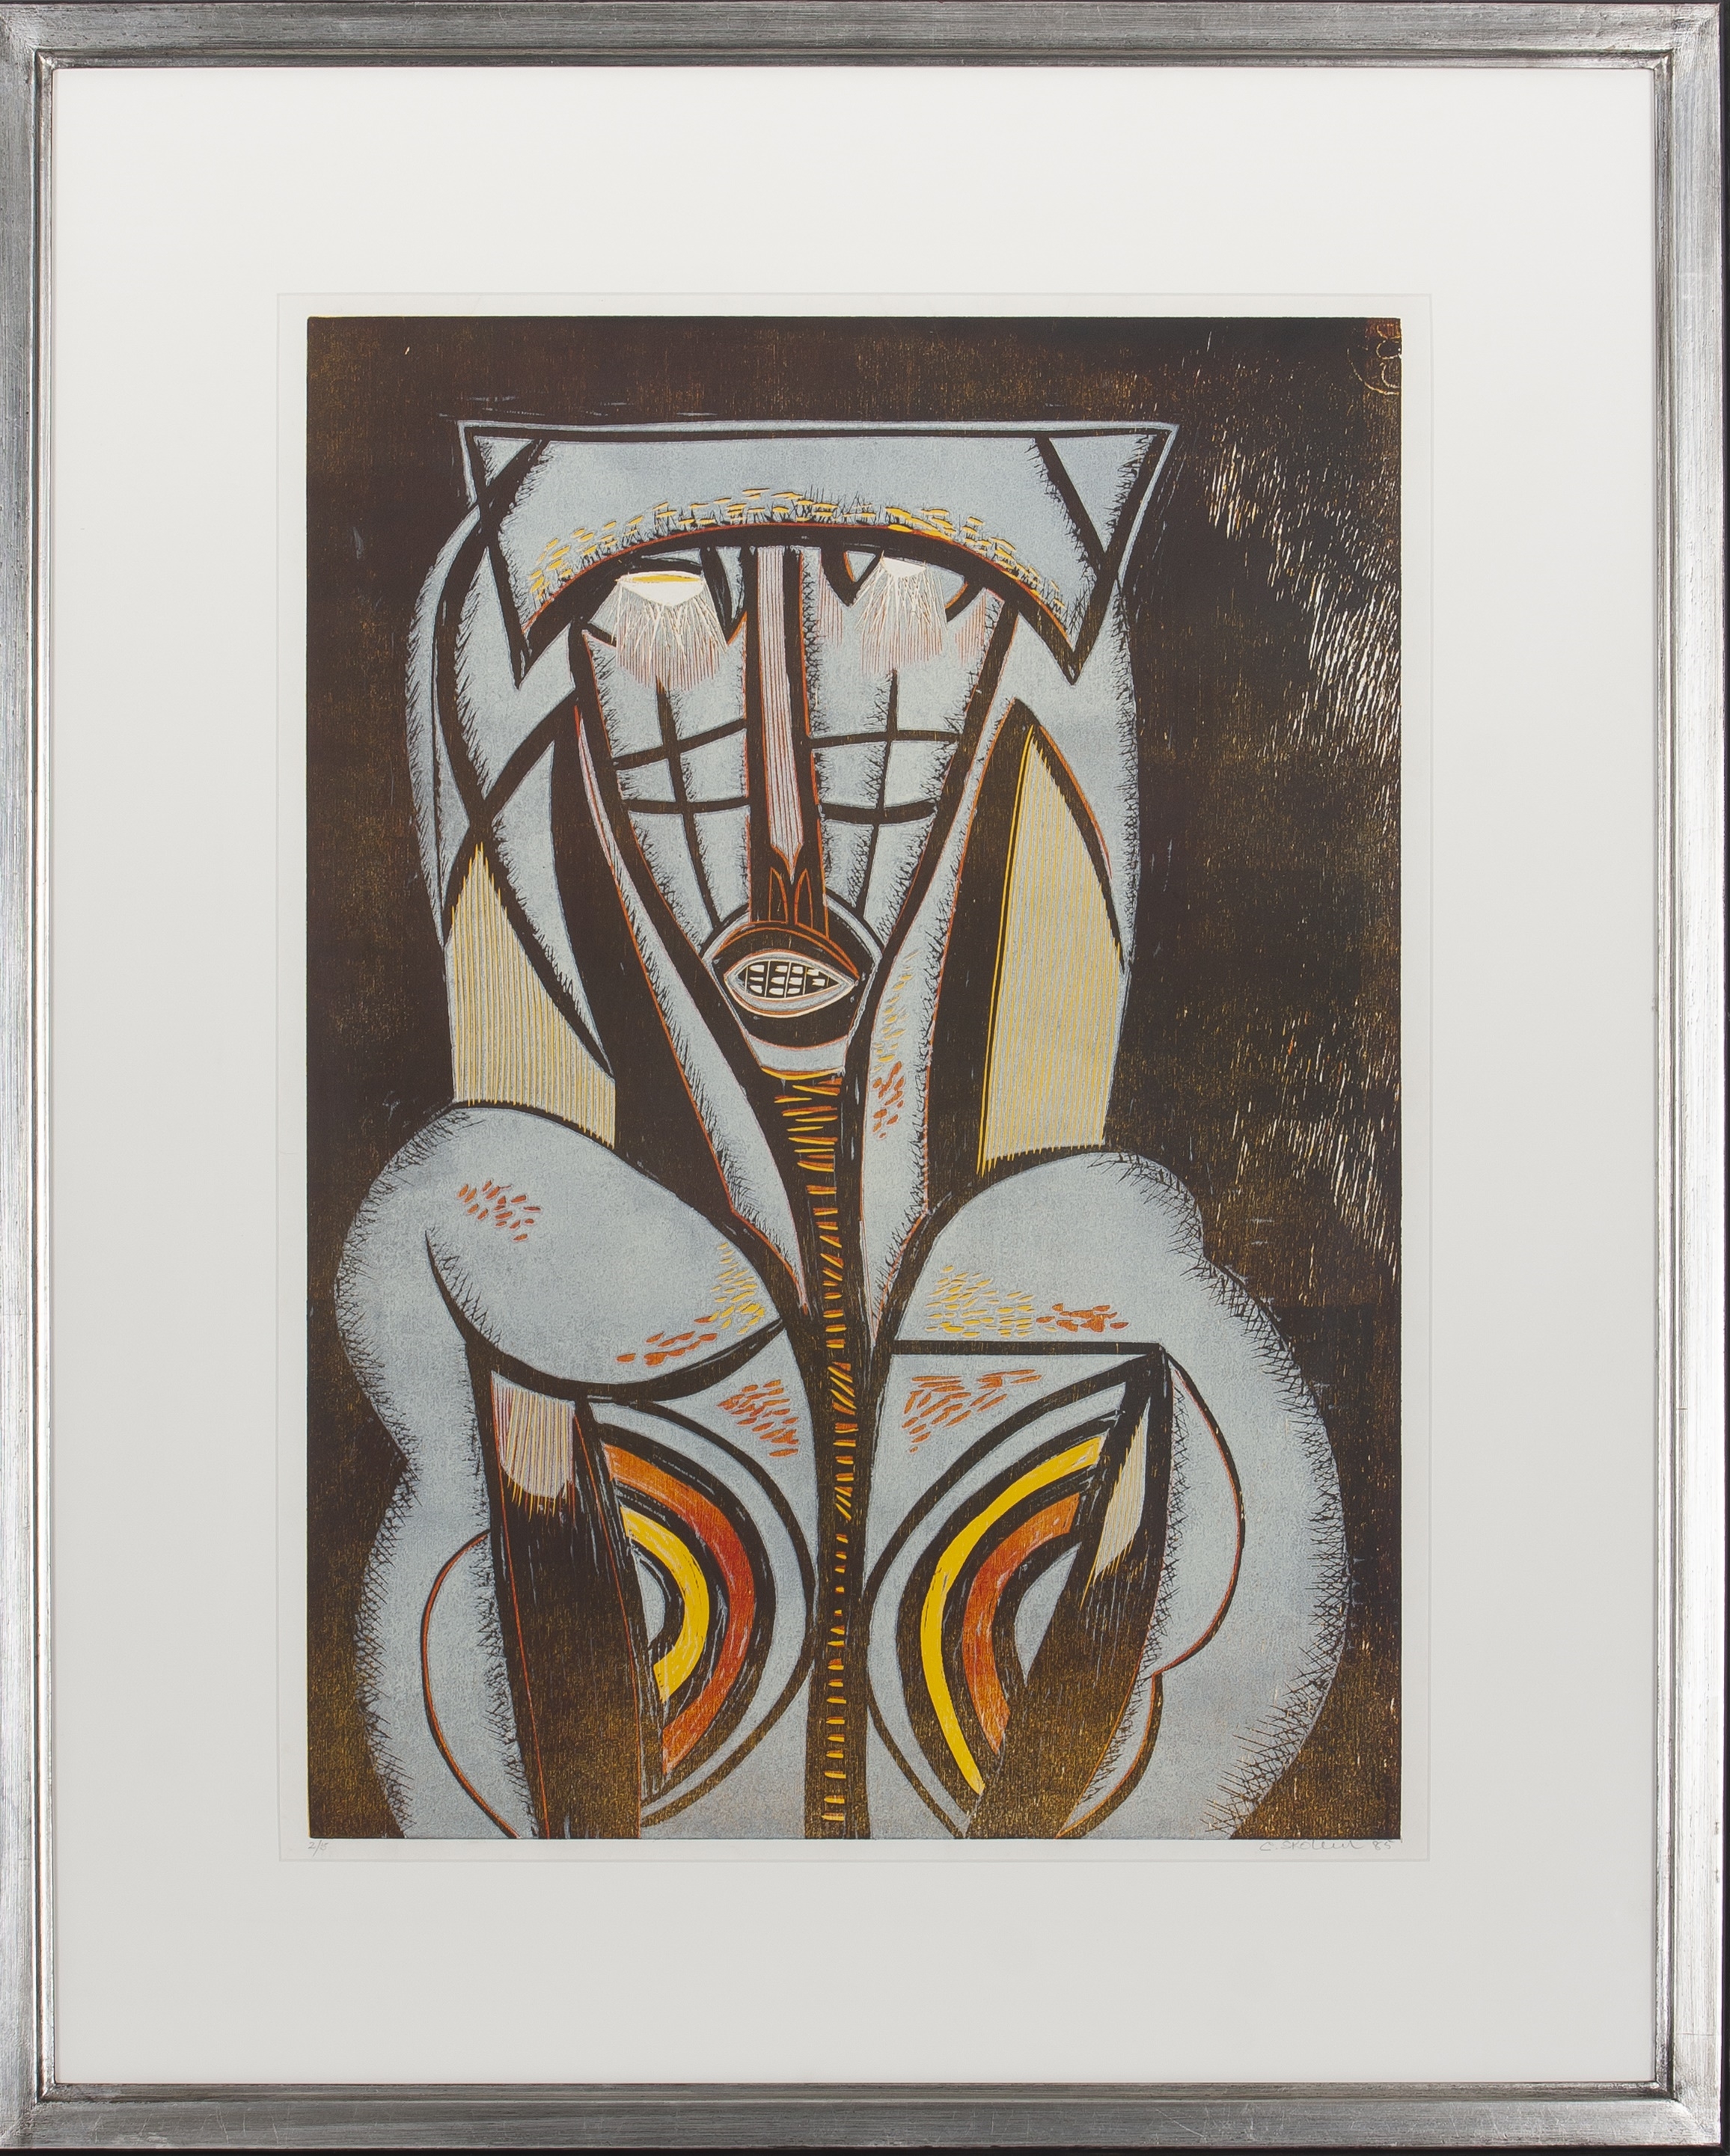 Artwork by Cecil Skotnes, Crowned figure, Made of colour woodcut